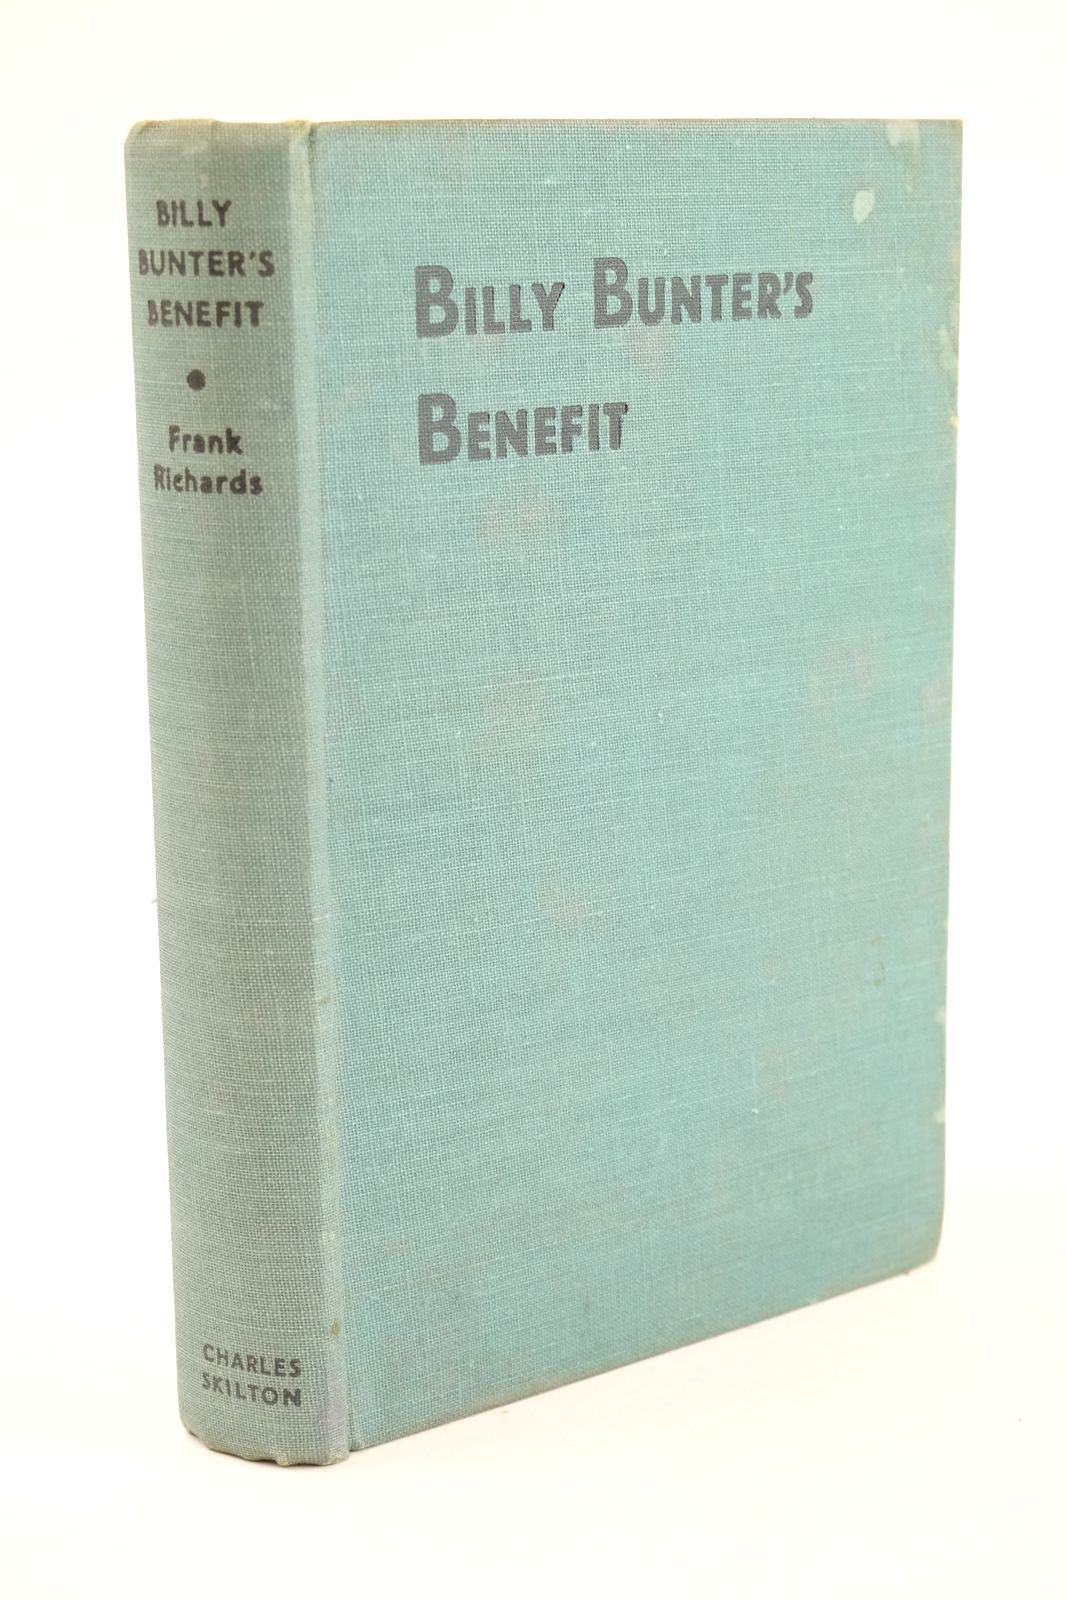 Photo of BILLY BUNTER'S BENEFIT written by Richards, Frank illustrated by Macdonald, R.J. published by Charles Skilton Ltd. (STOCK CODE: 1323898)  for sale by Stella & Rose's Books